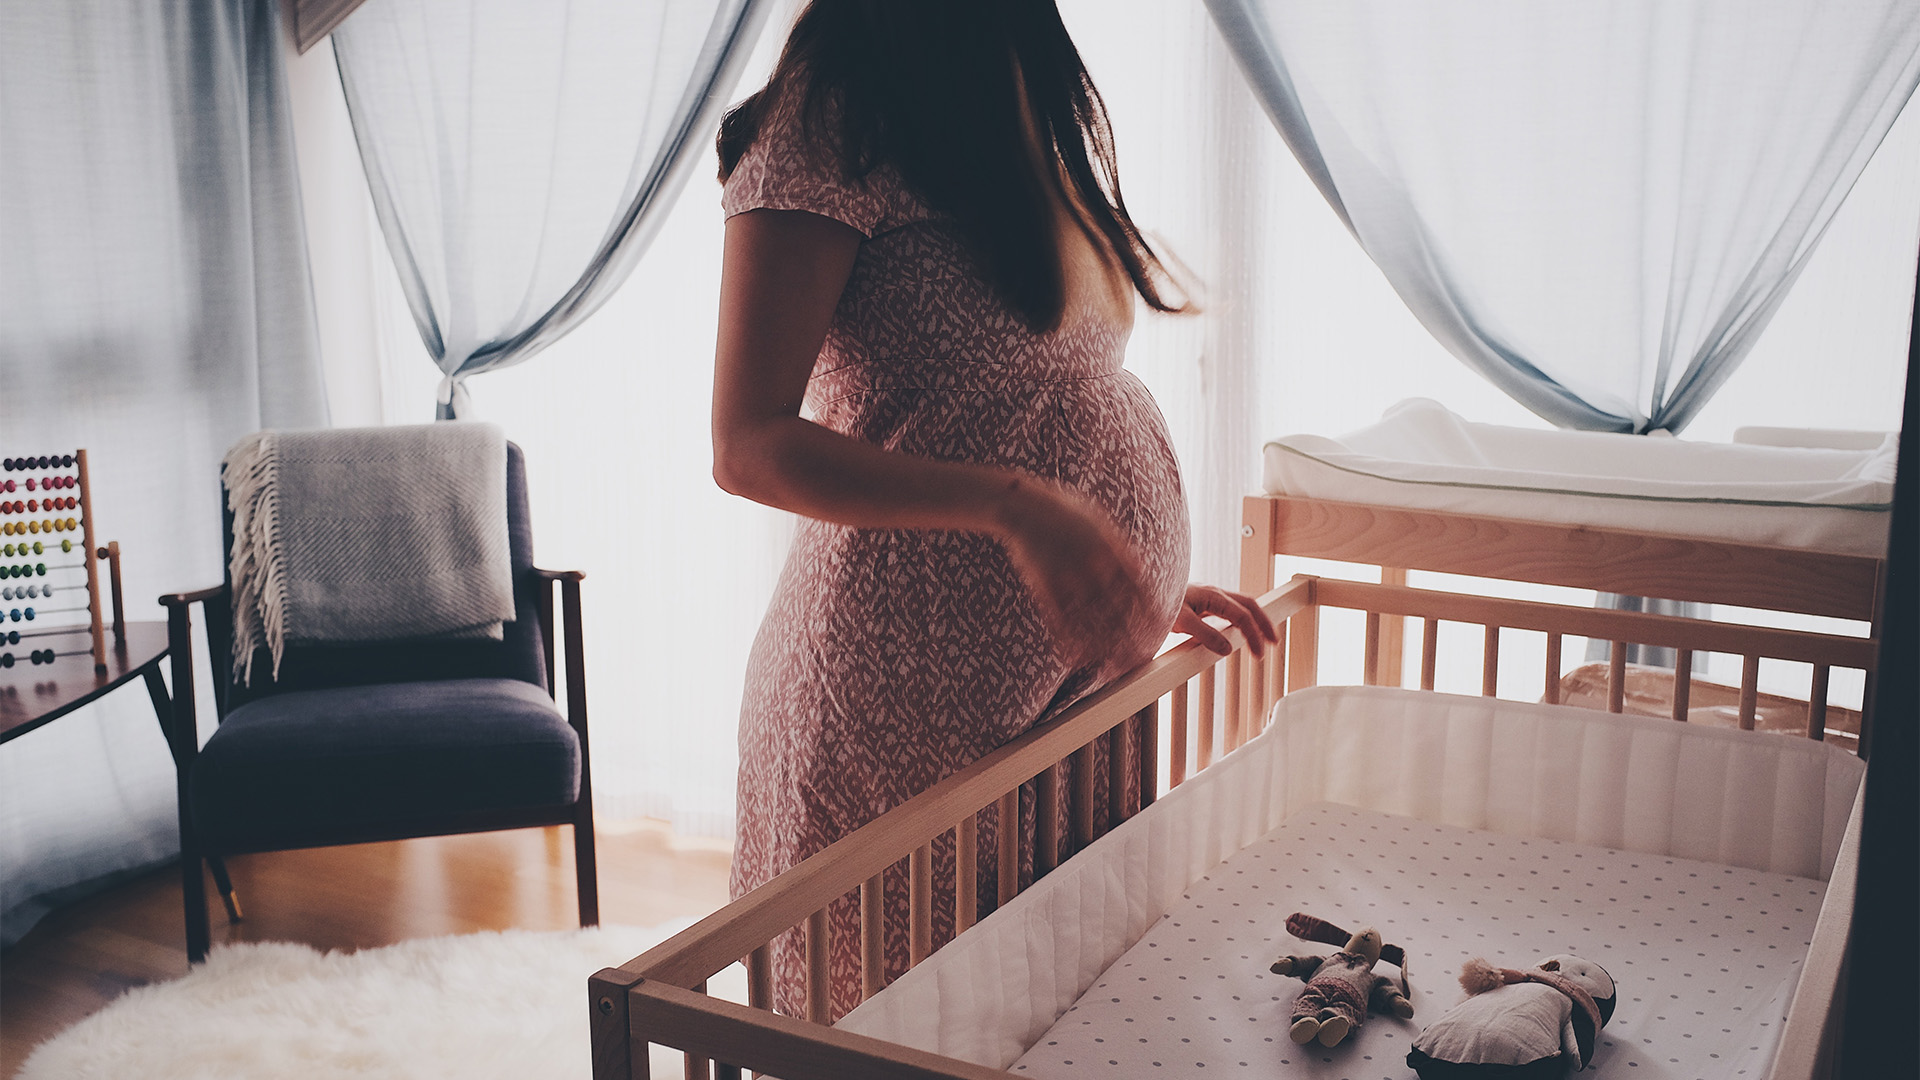 A pregnant woman in a nursery, standing over a crib/cot